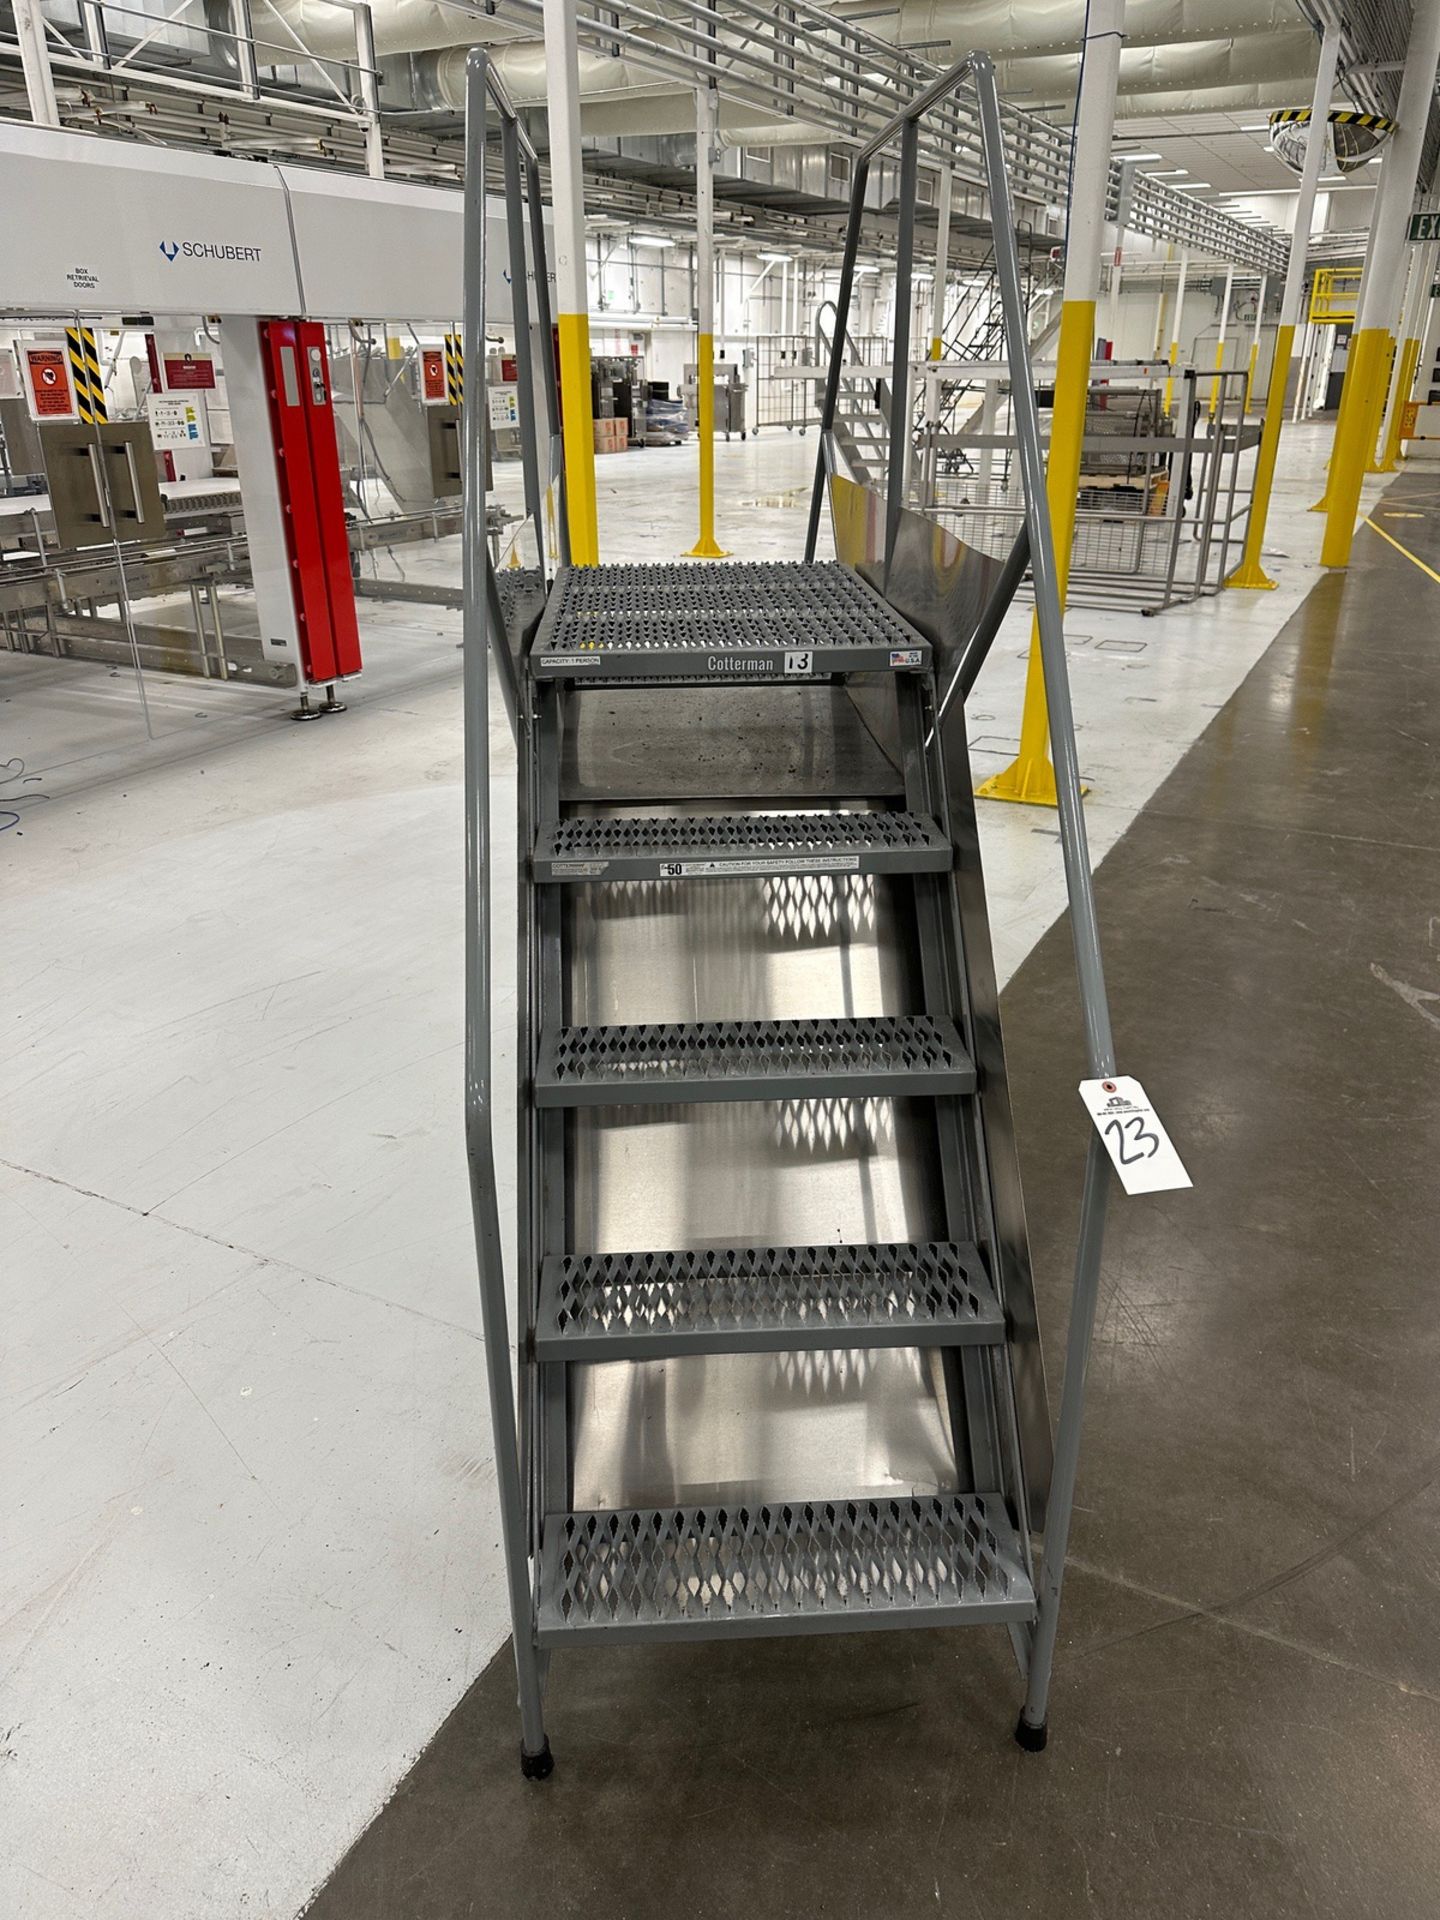 Cotterman Easy 50 - 350 LB. Capacity 5-Step Line Walkover with 3' x 2' Platform, 41 | Rig Fee $175 - Image 2 of 3